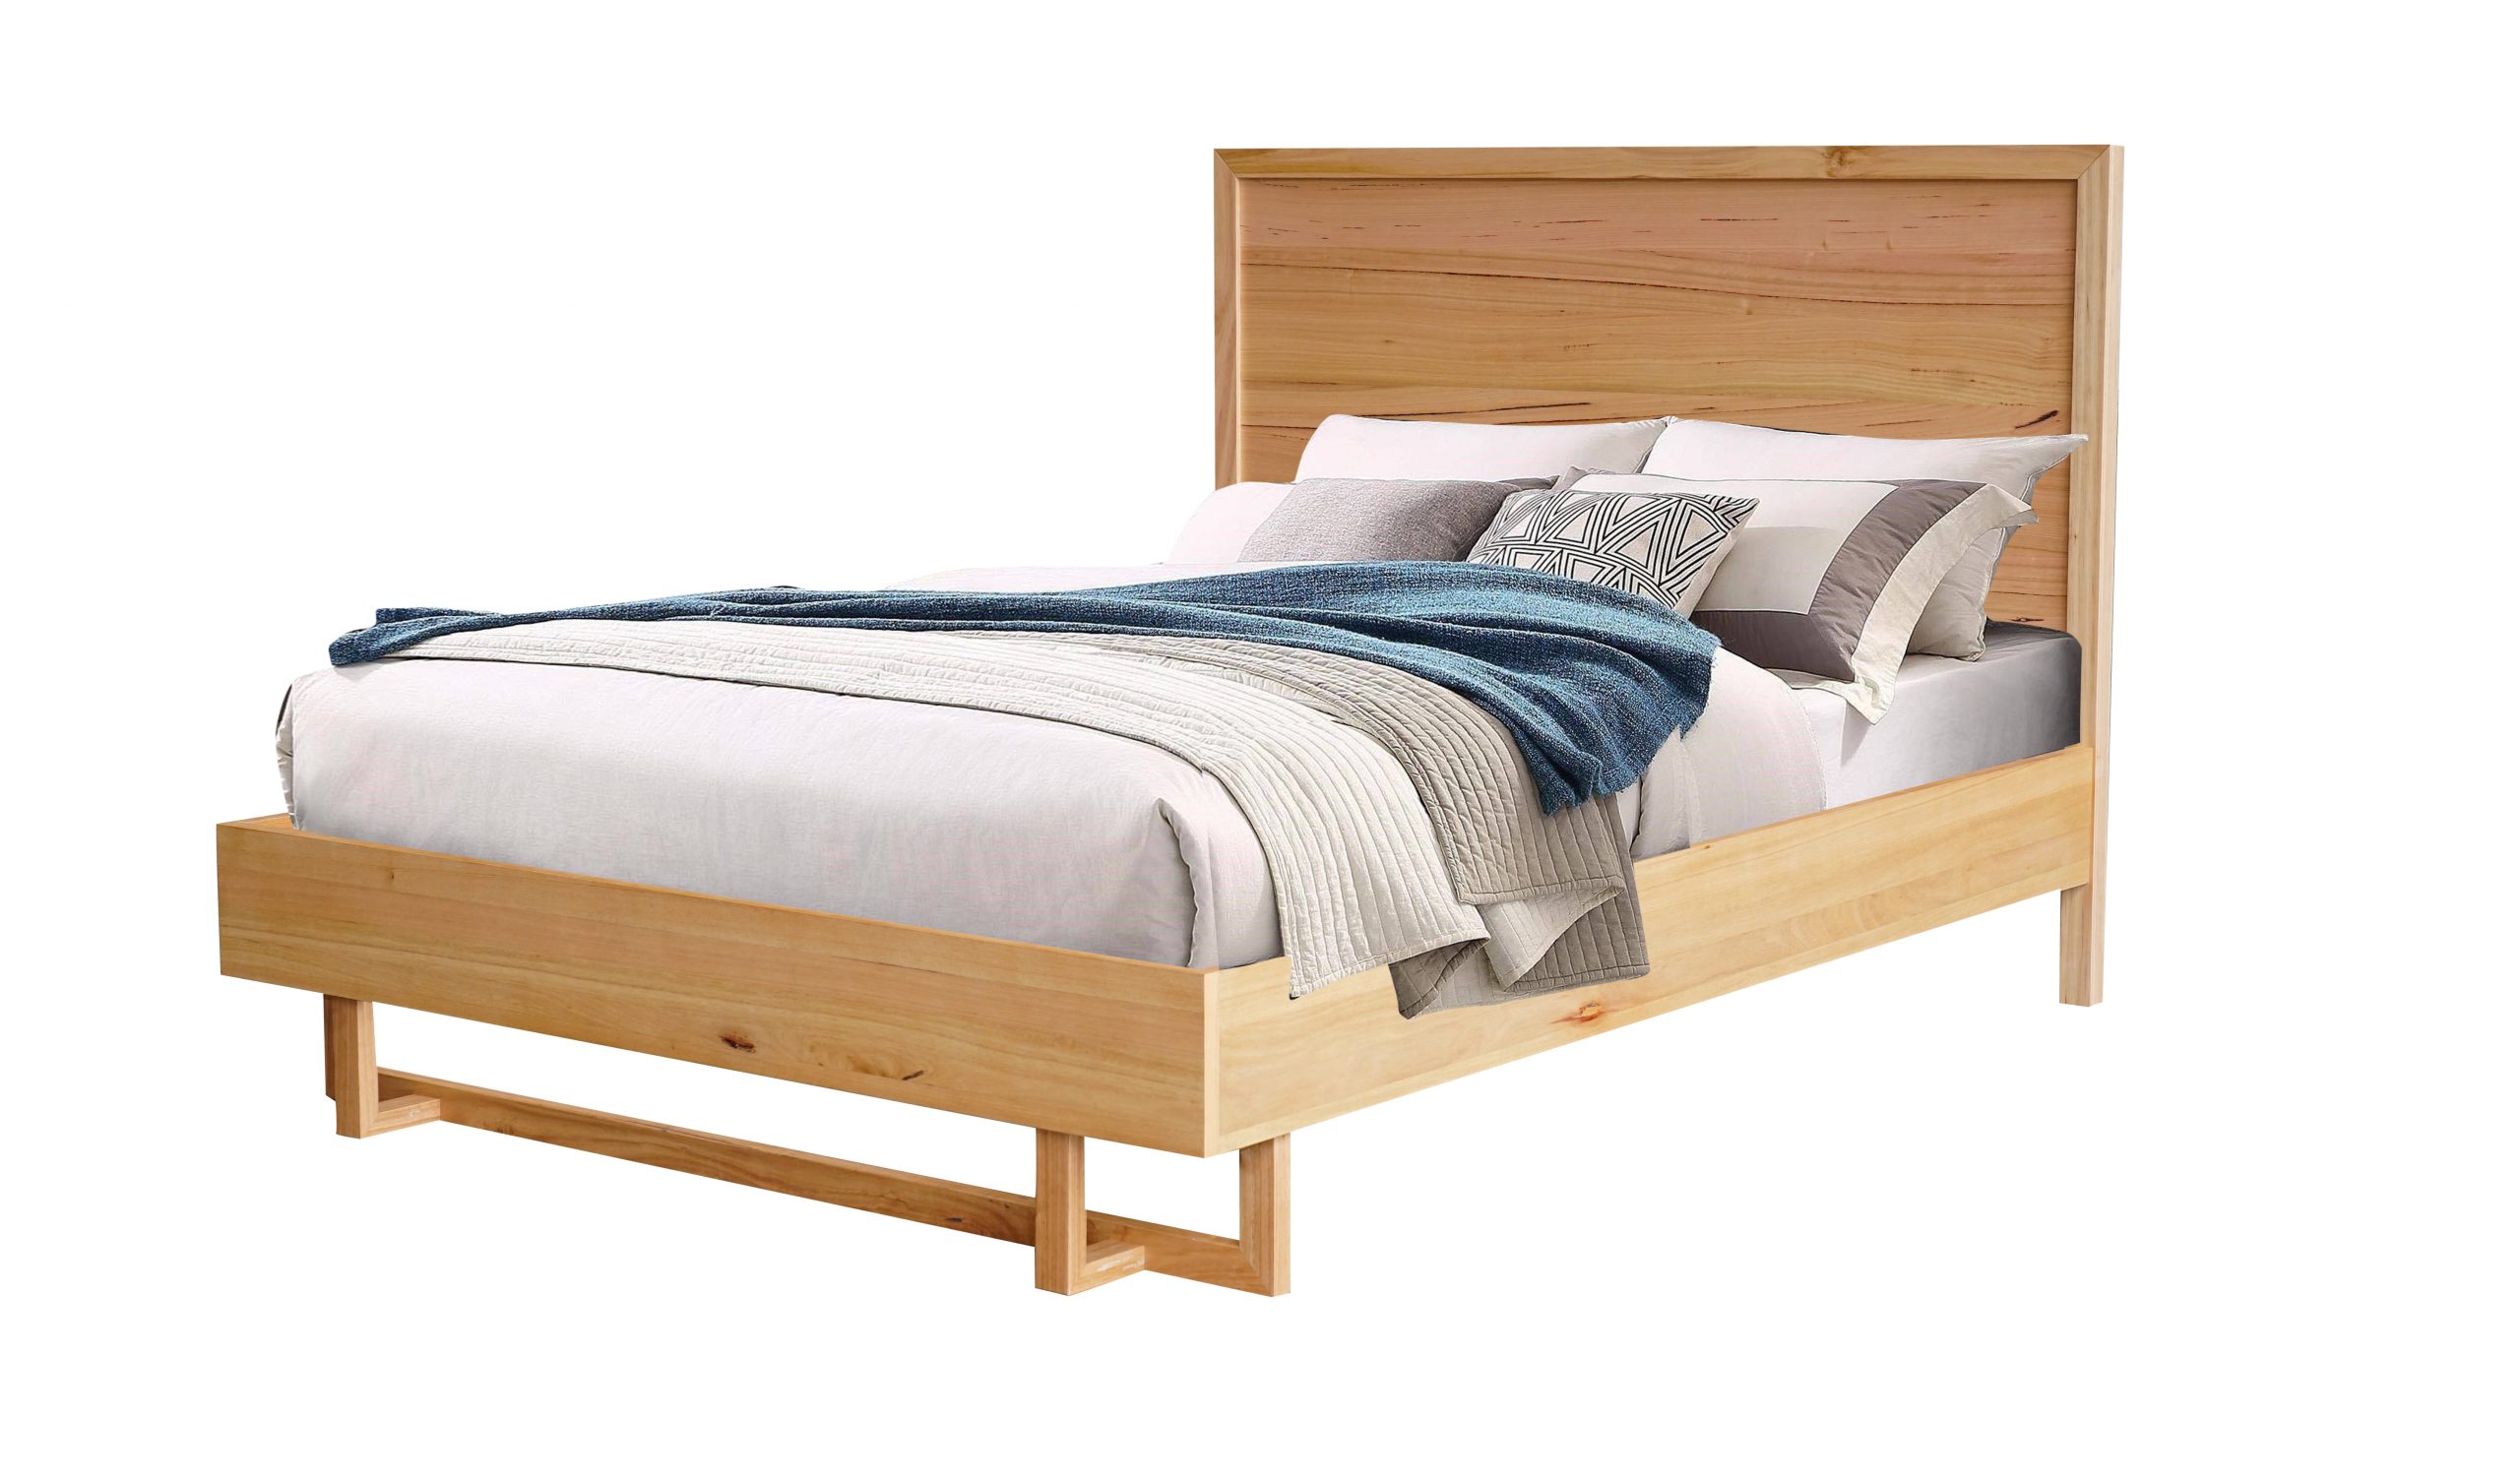 DANTE BED scaled 1 - Dante Queen Bed - Messmate